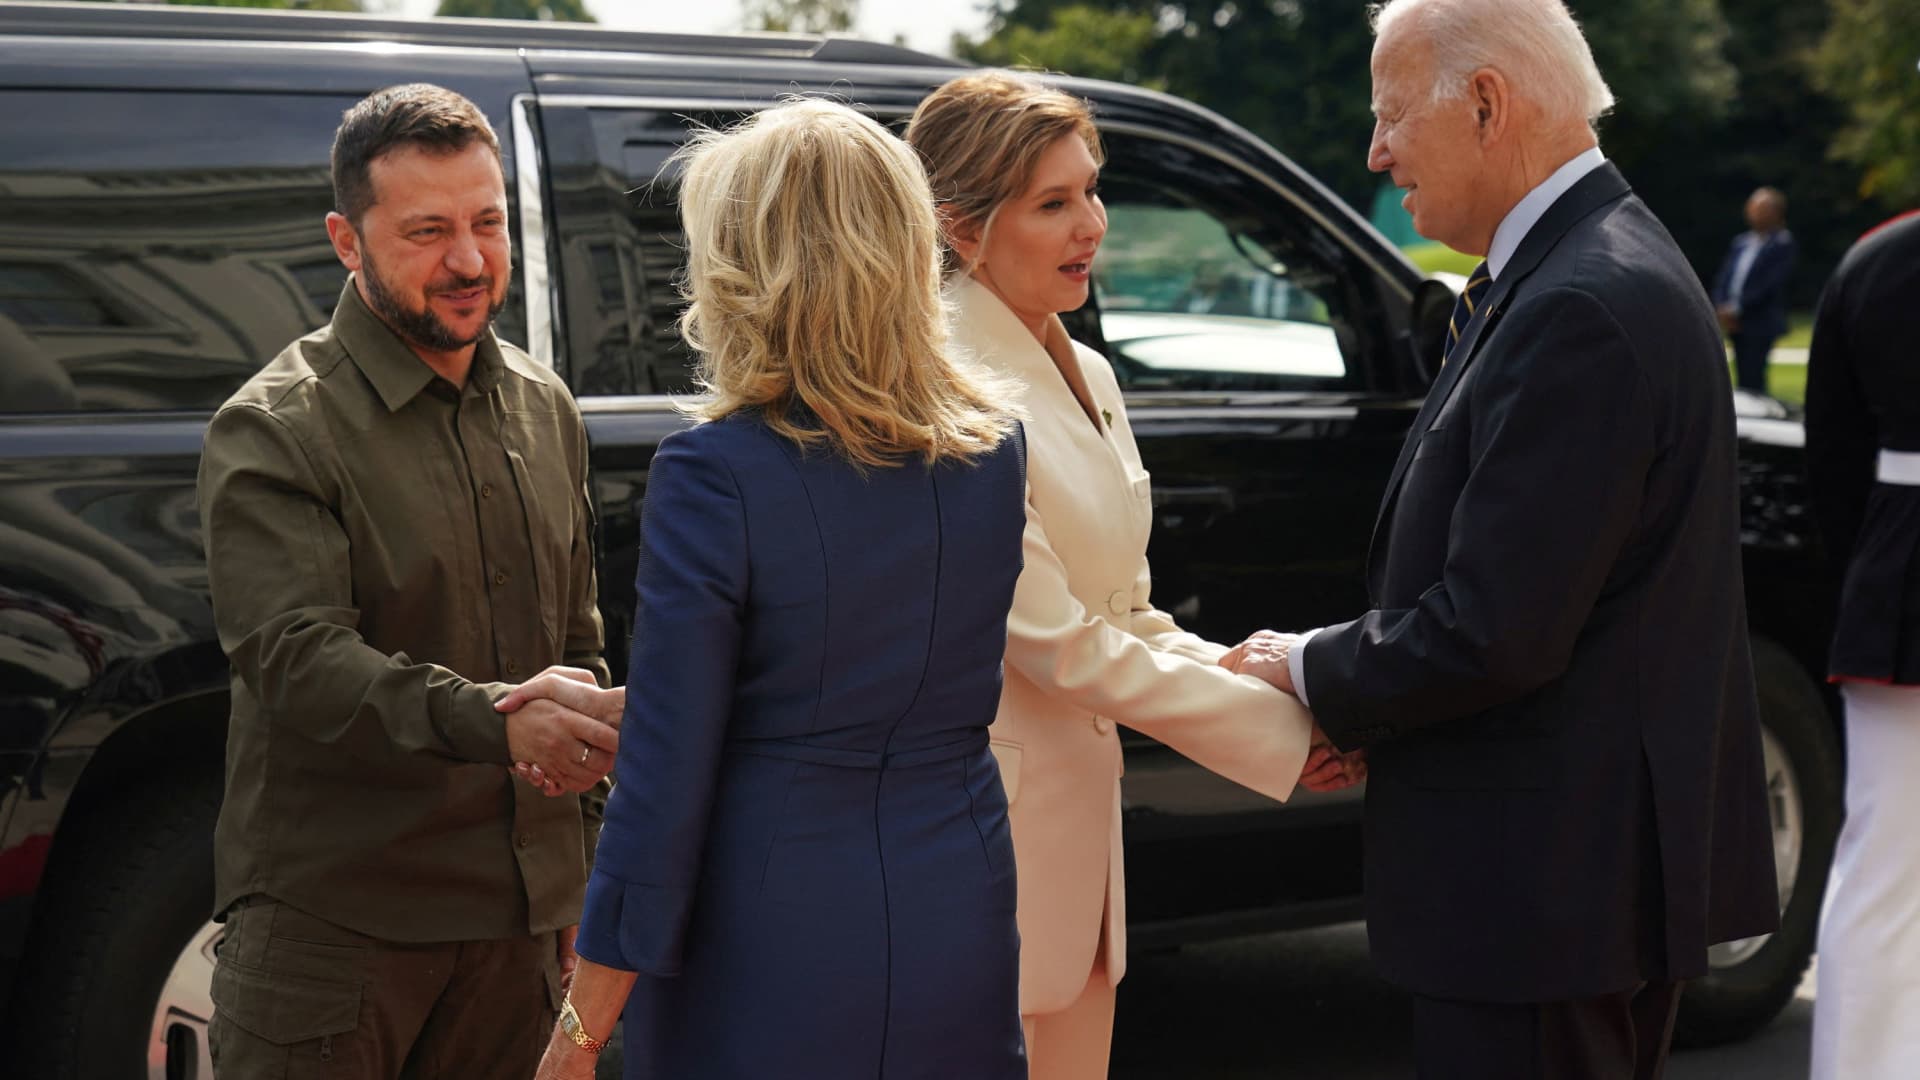 U.S.President Joe Biden and first lady Jill Biden welcome Ukrainian President Volodymyr Zelenskyy and his wife Olena as they arrive on the South Lawn of the White House in Washington, September 21, 2023.